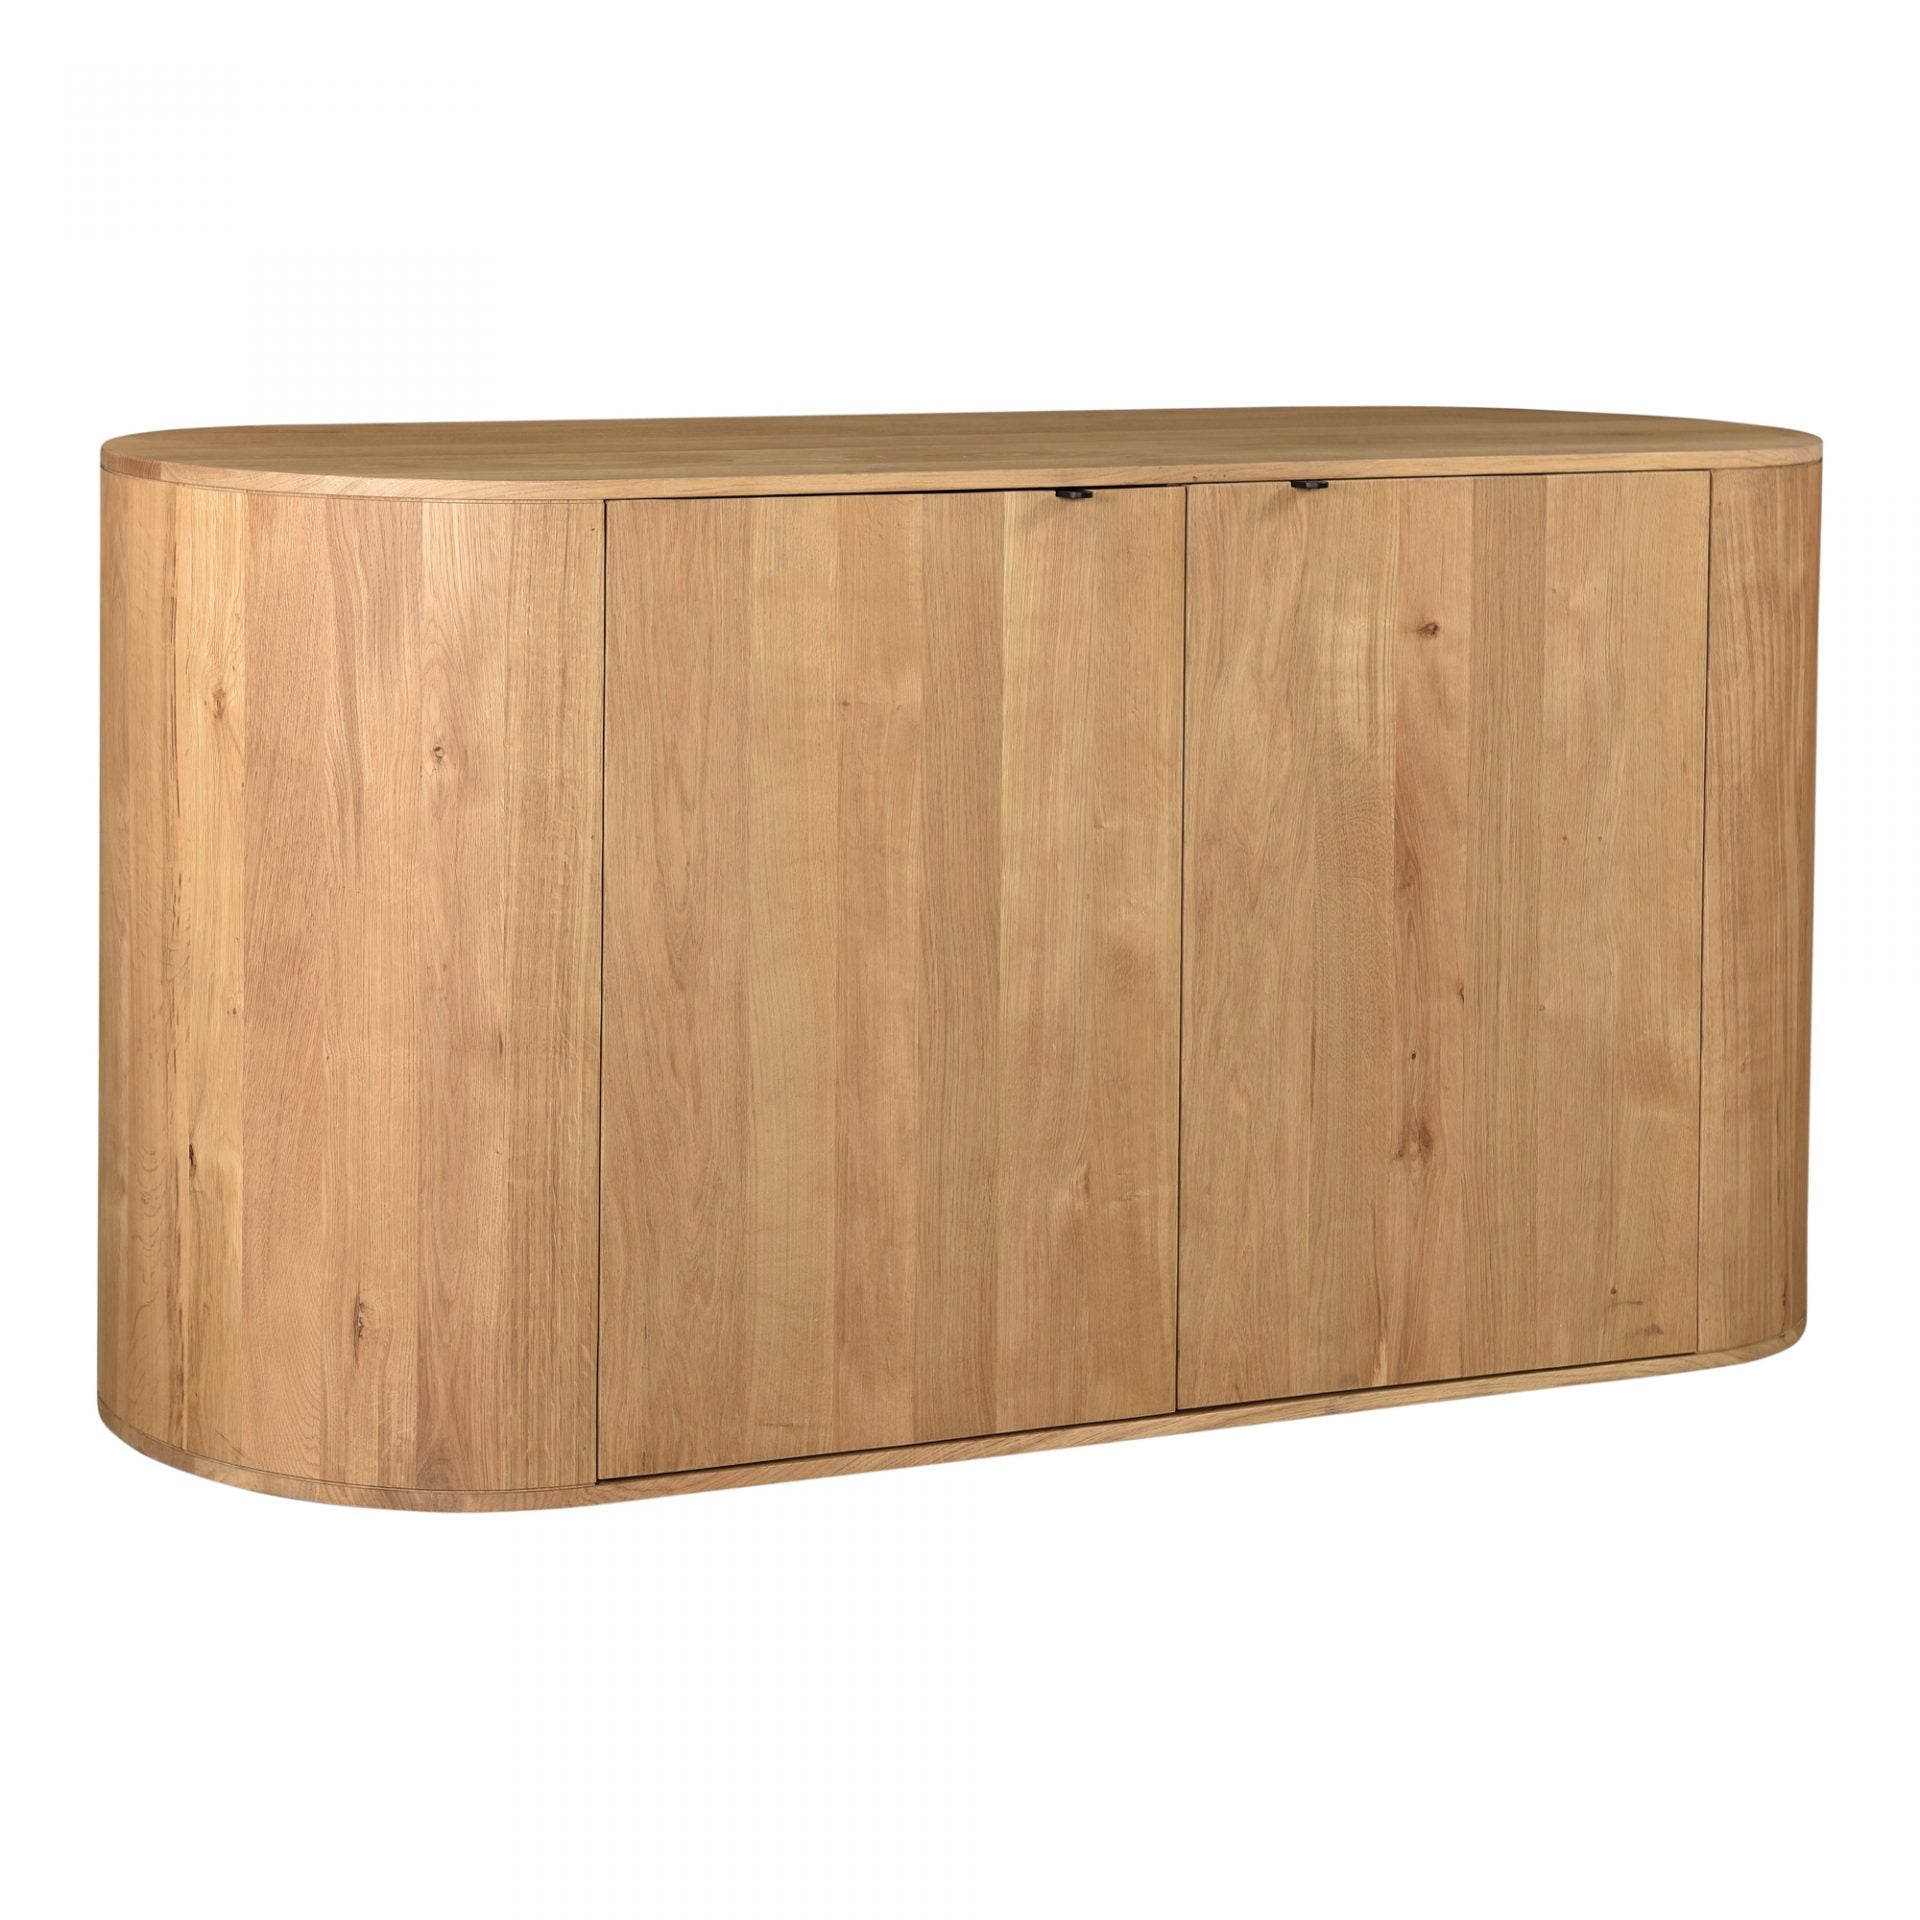 Made from solid oak, the Theo Sideboard gives us all the natural, earthy vibes. The doors open to spacious interior shelves and have a magnetic door to help keep them shut. A perfect choice for families wanting extra storage while still making a statement in the room.   Size: 66"W x 22.5"D x 31.5"H Material: Solid Oak